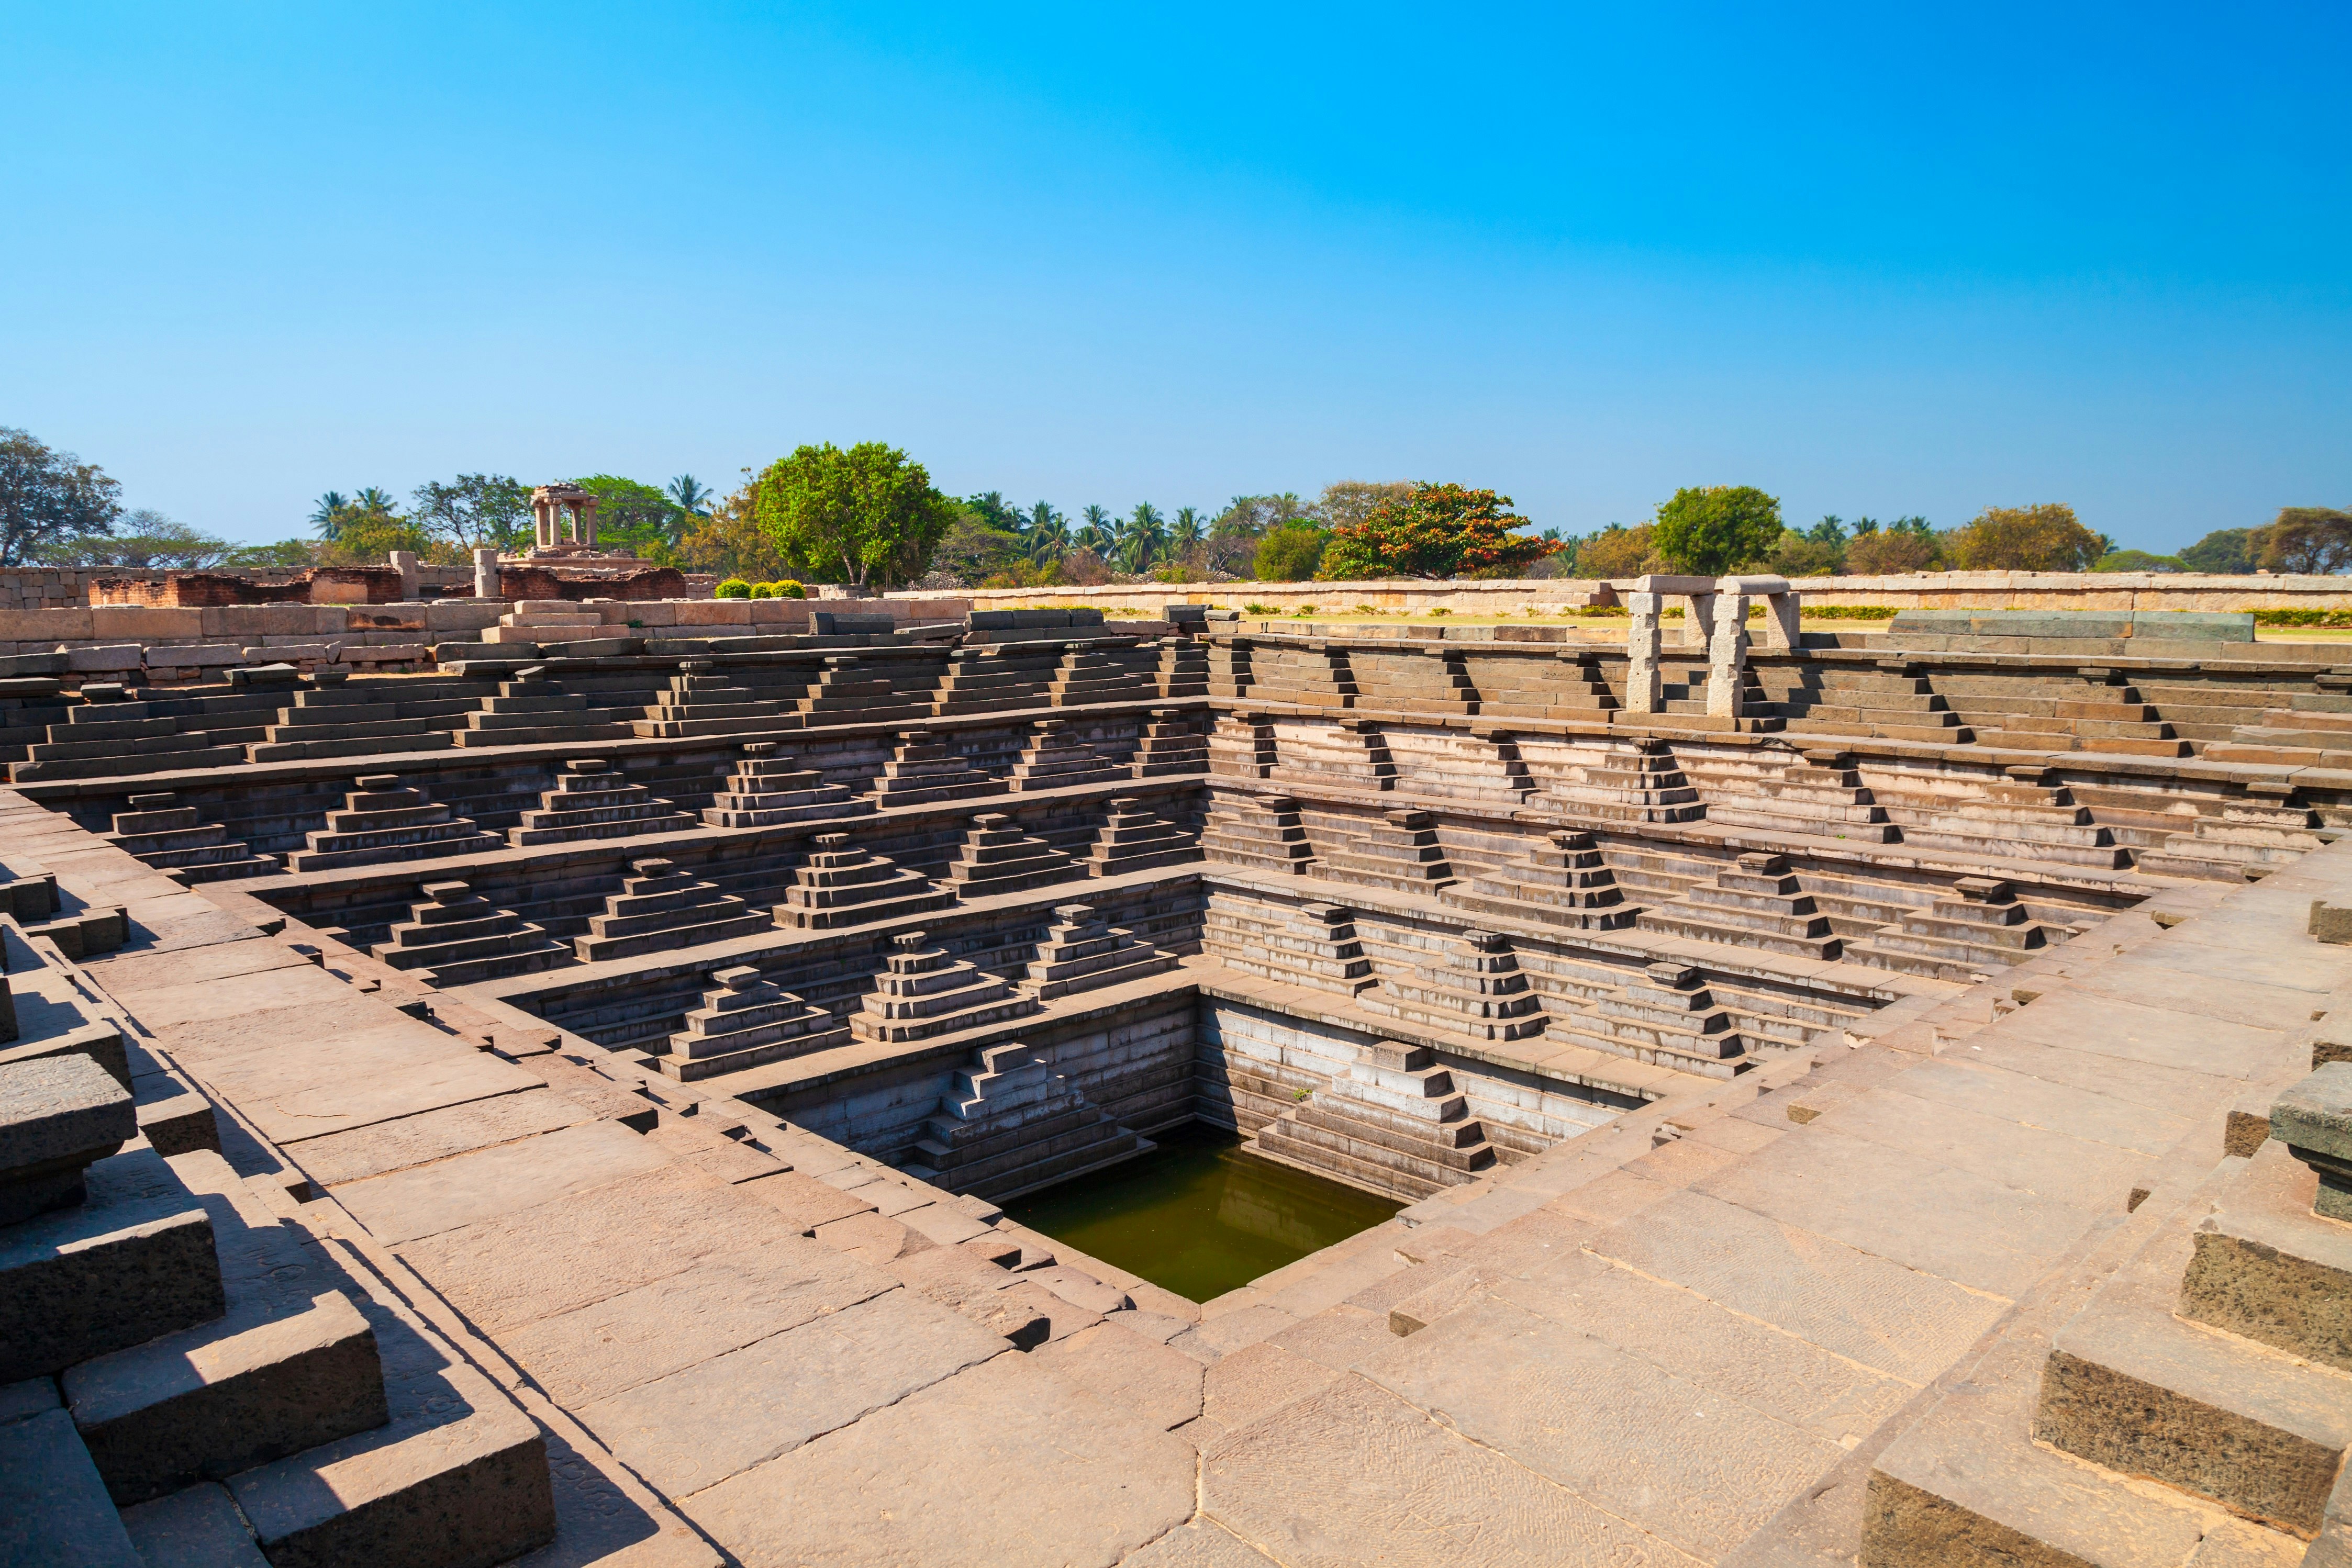 A stepped square water tank at Hampi. Stairs cascade down the walls of the well from all sides, down to a small pool of blue water in the centre.